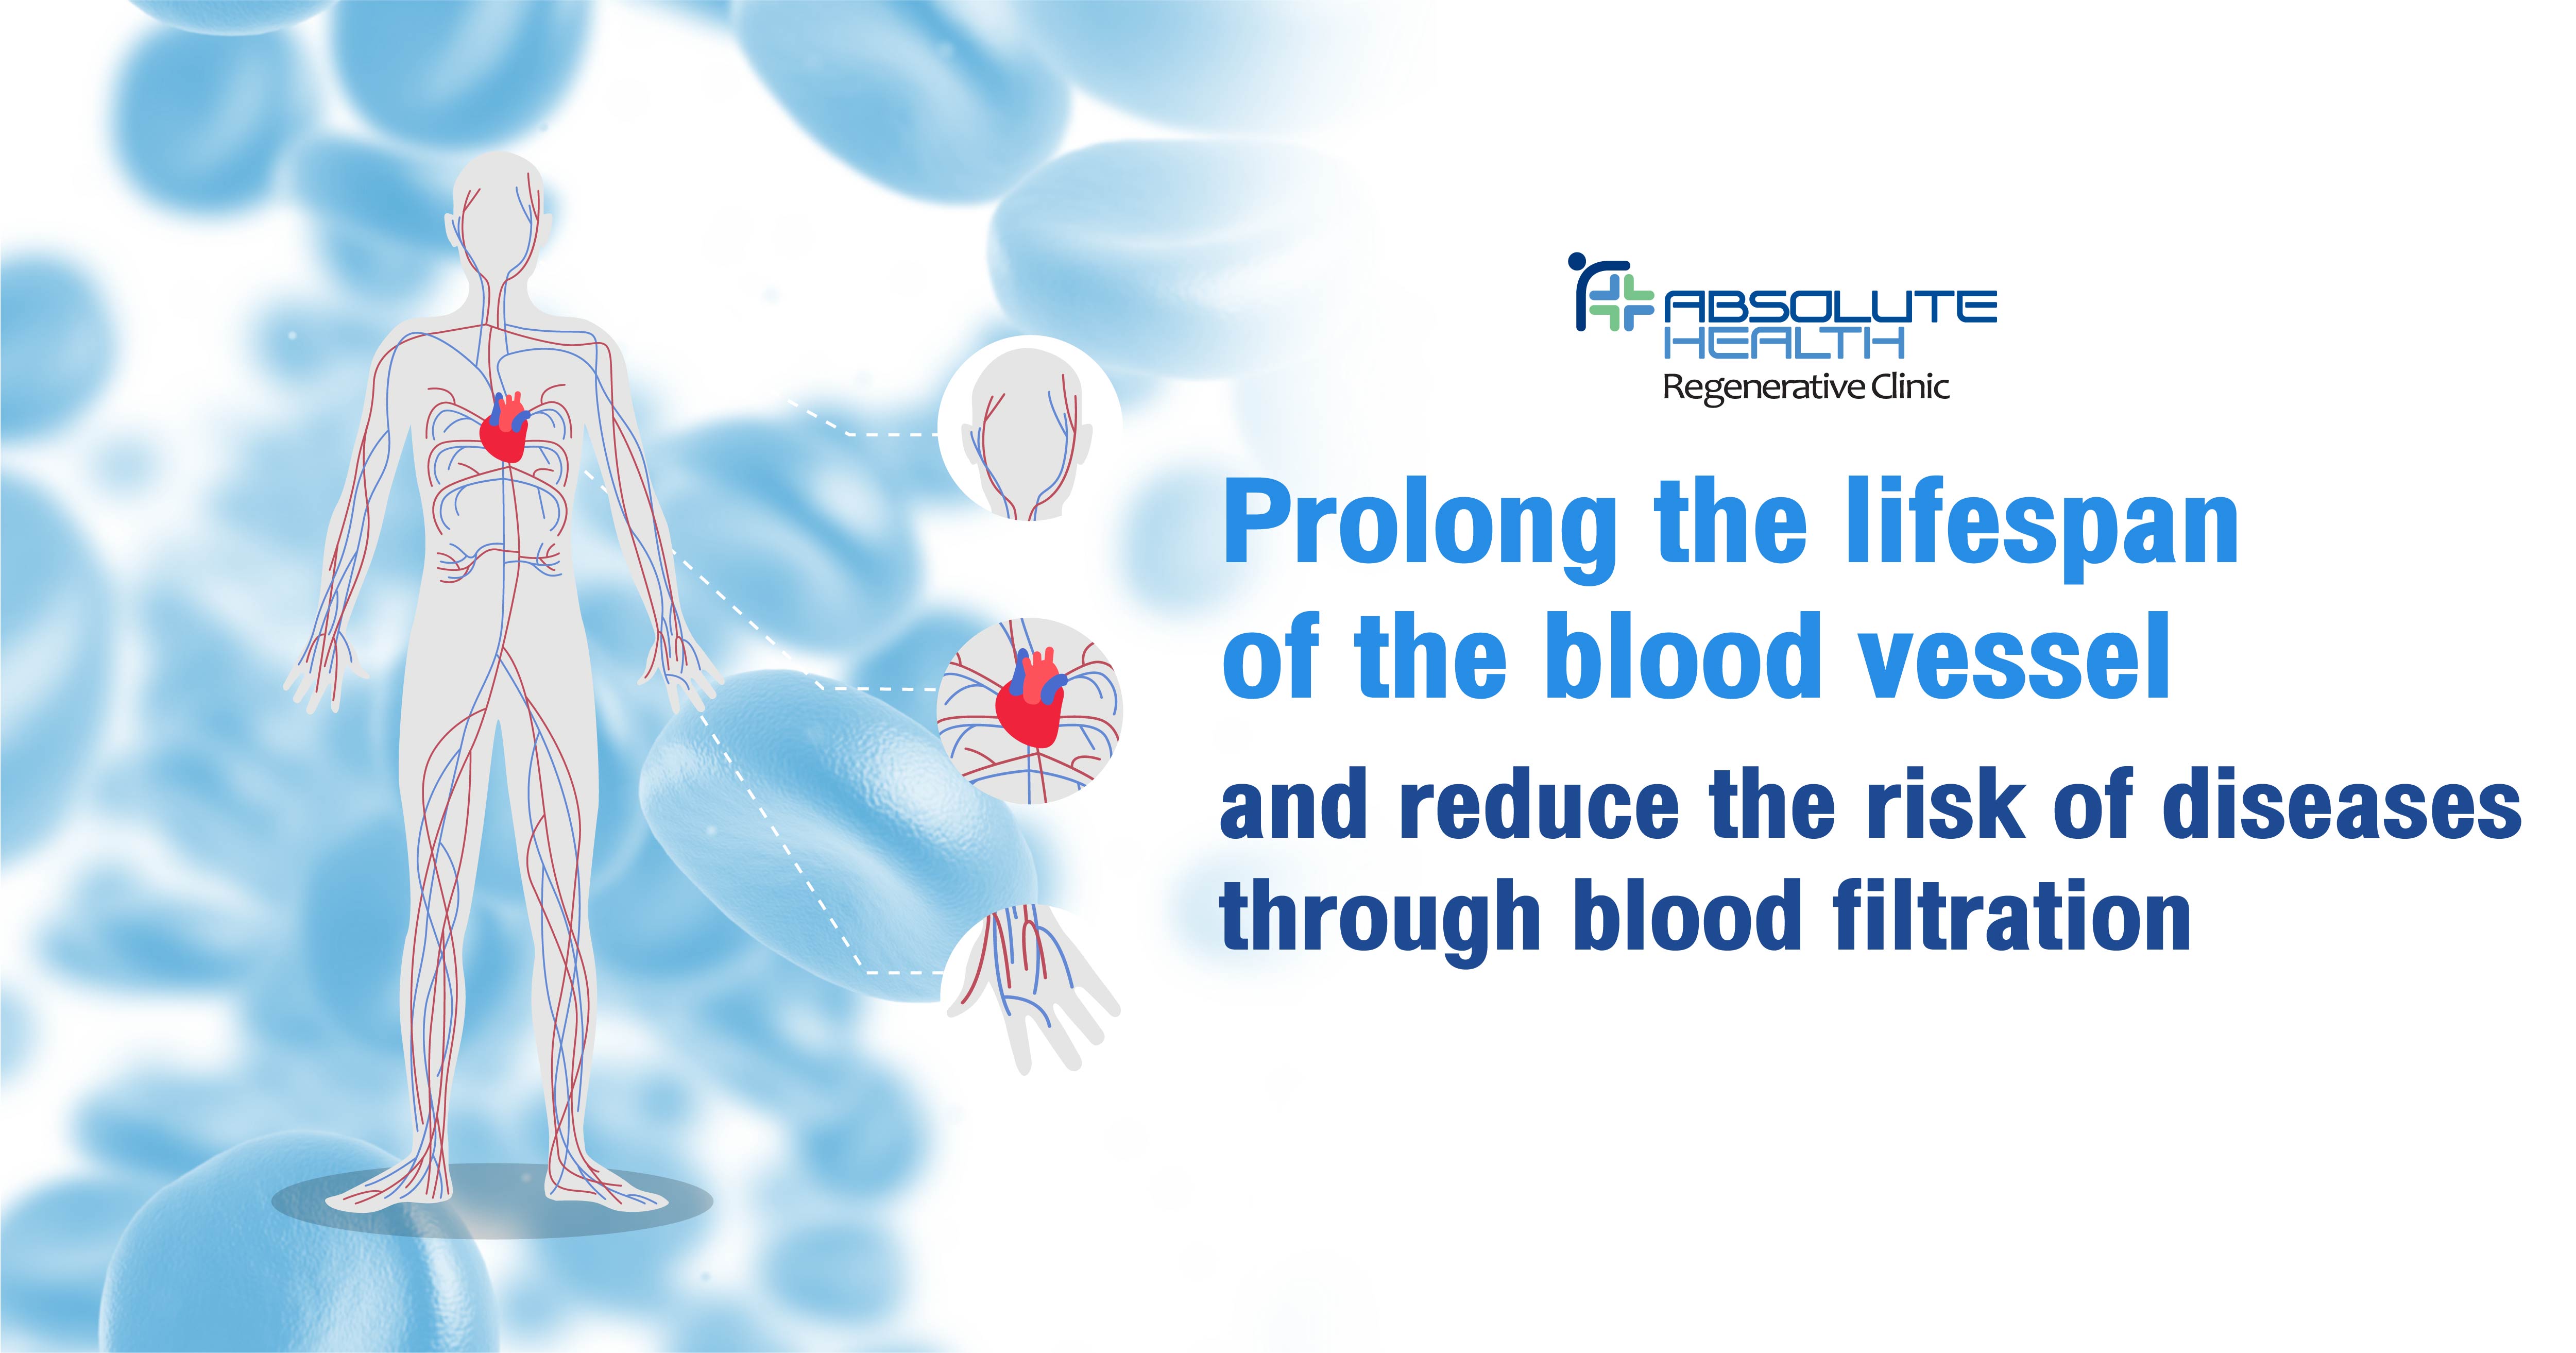 Prolong the lifespan of the blood vessel and reduce the risk of diseases through blood filtration 